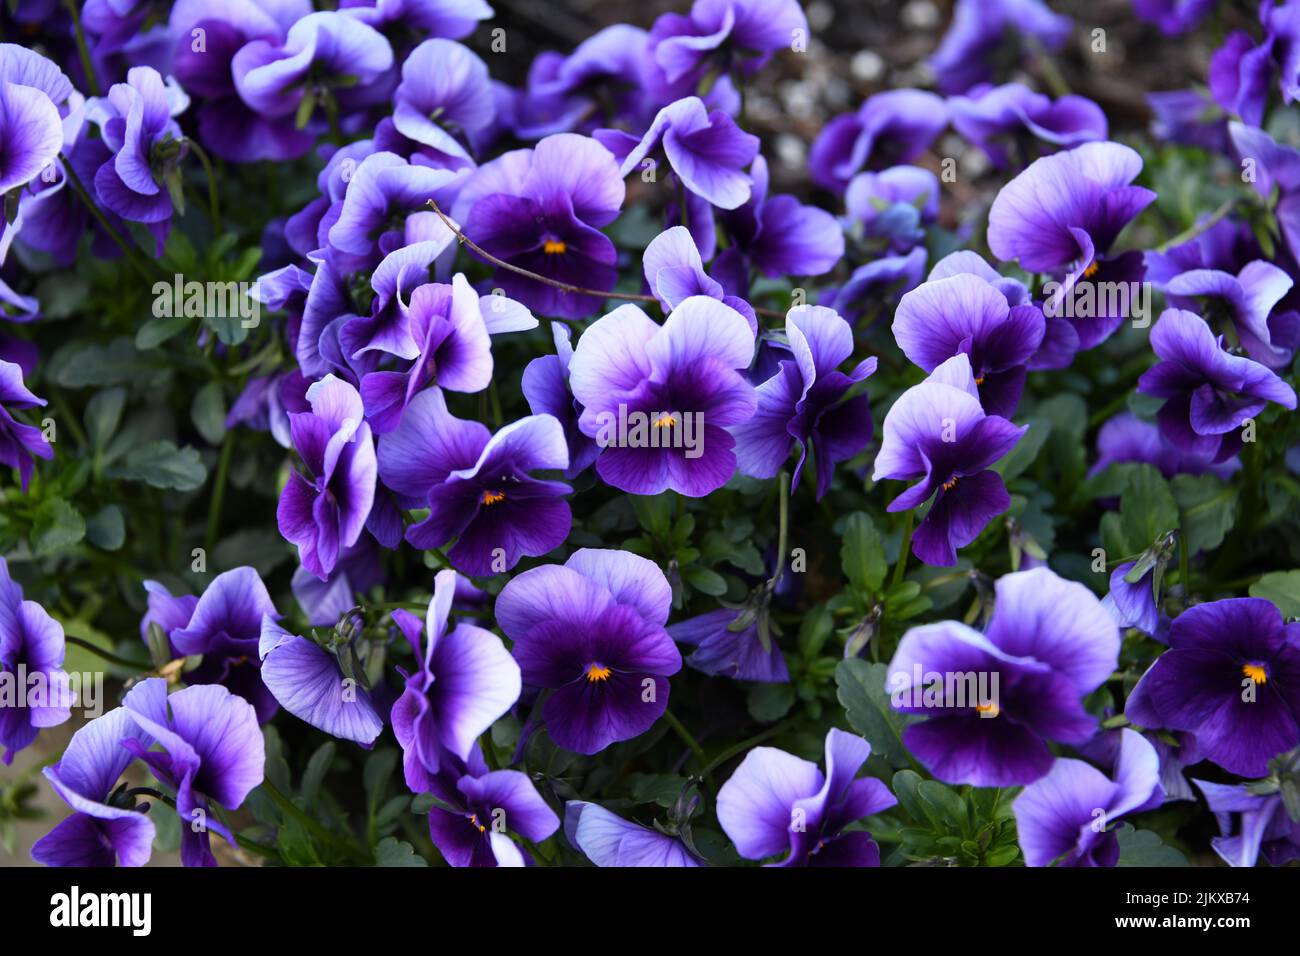 A closeup shot of beautiful Viola flowers with violet petals in a green garden Stock Photo